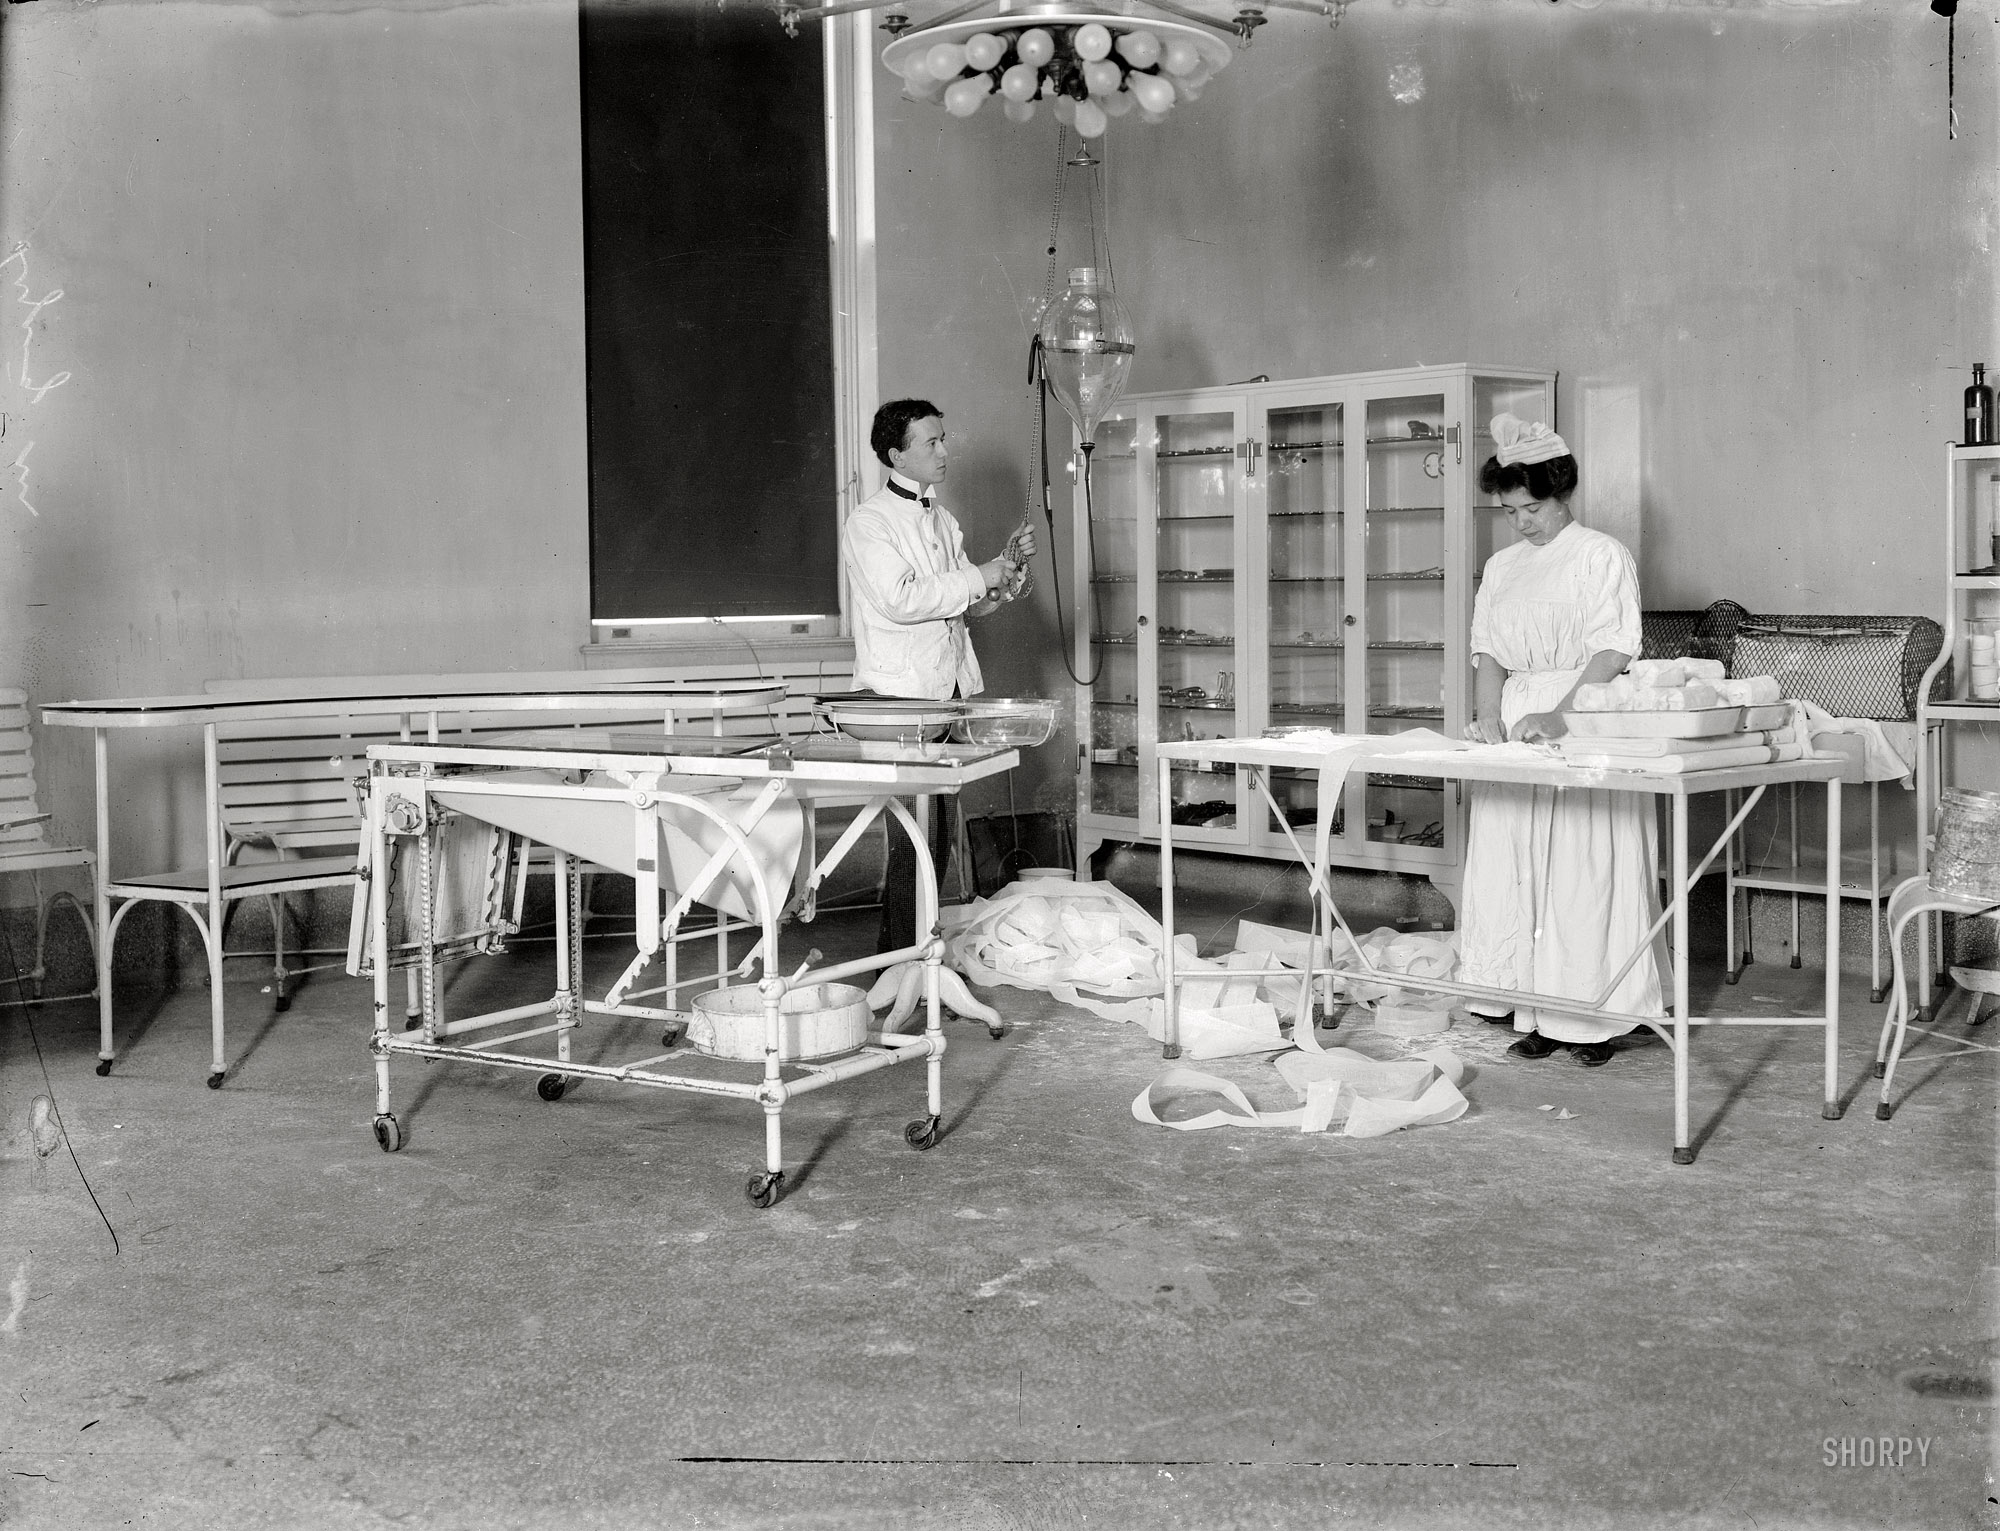 New York circa 1908. "Lying-In Hospital, Second Avenue." A peek behind the scenes at the Lying-In (or maternity) hospital, which in addition to scalpels had a number of cutting-edge medical devices. 8x10 glass negative. View full size.